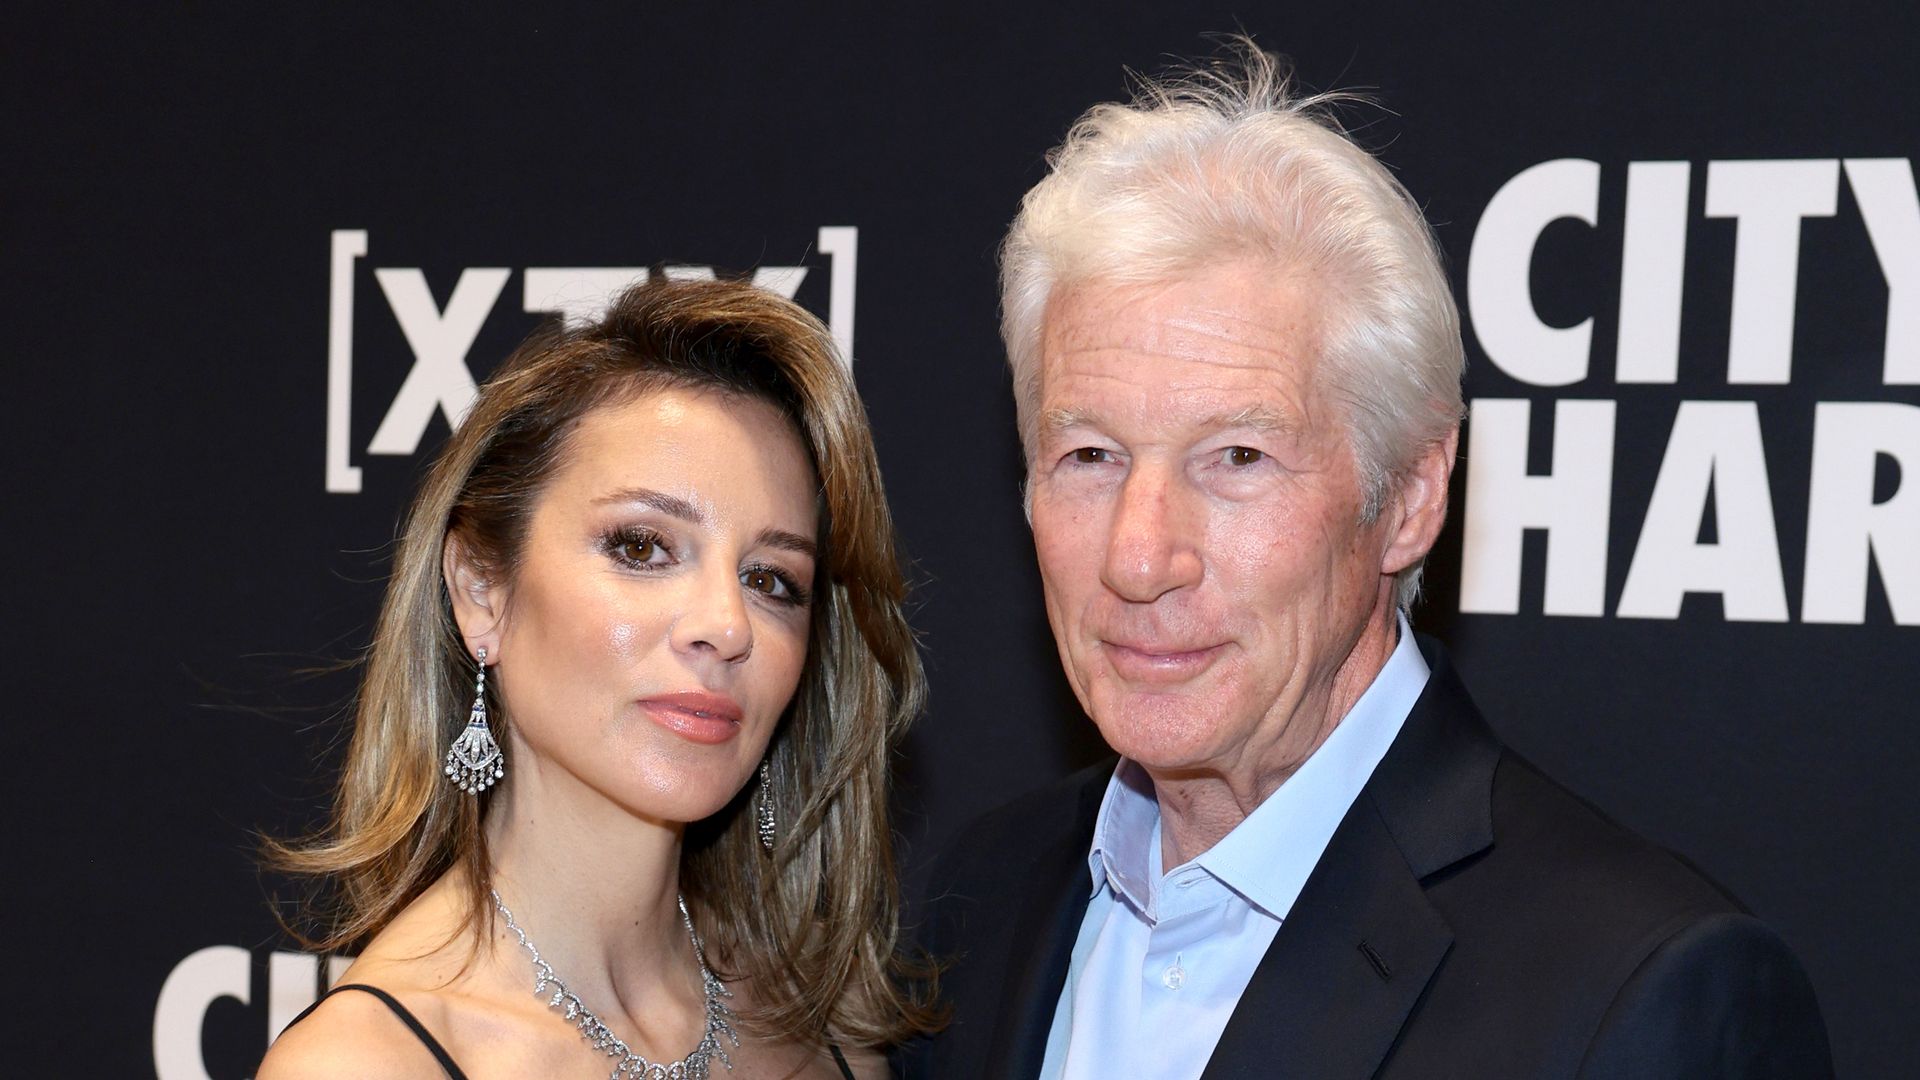 Richard Gere, 74, makes rare outing with wife Alejandra Silva, 41 on glamorous date night